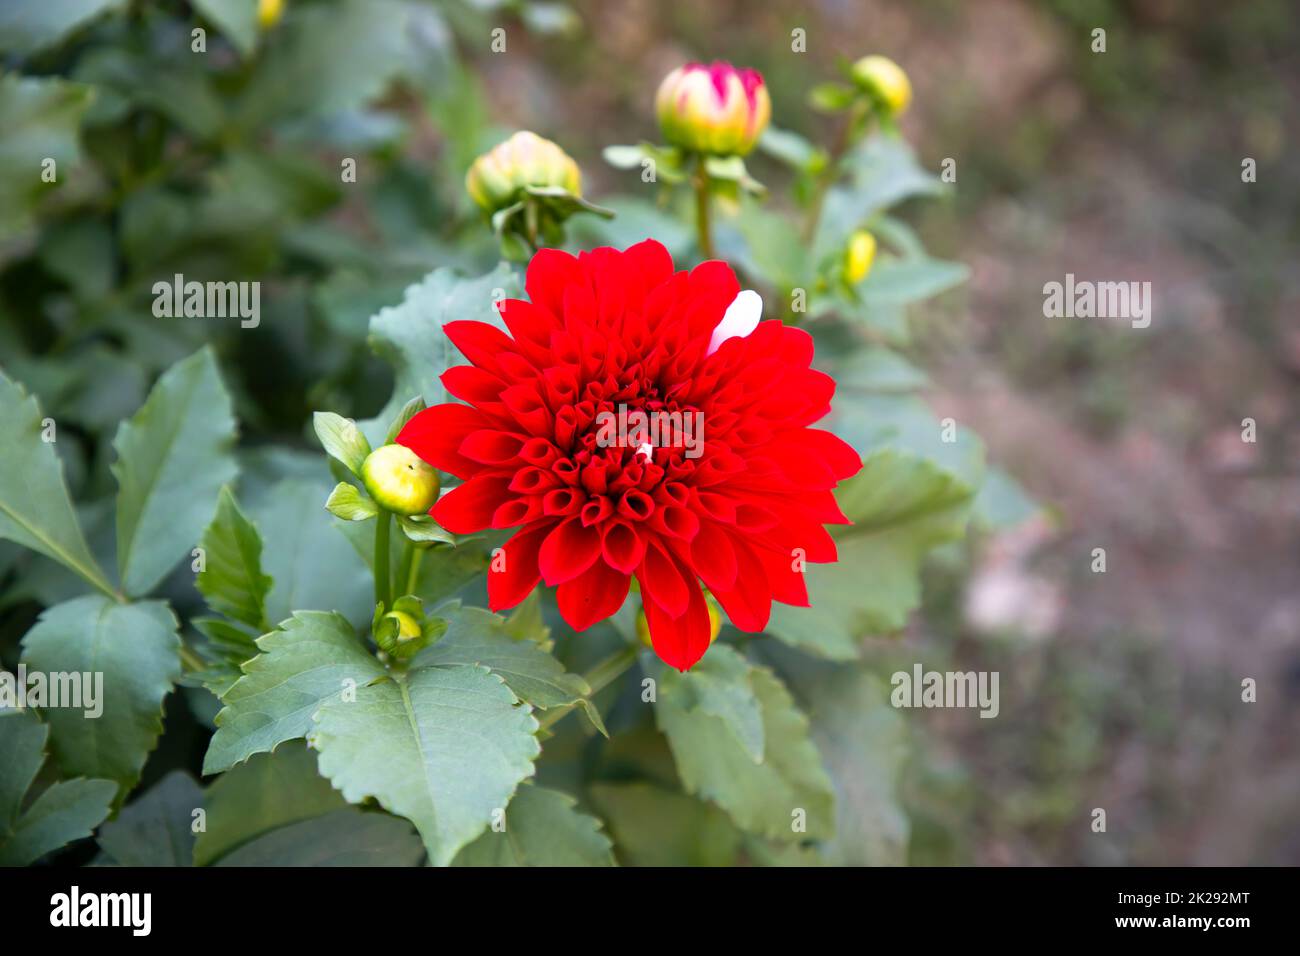 Red Blooming Dahlia Flower in the Garden Tree. Stock Photo